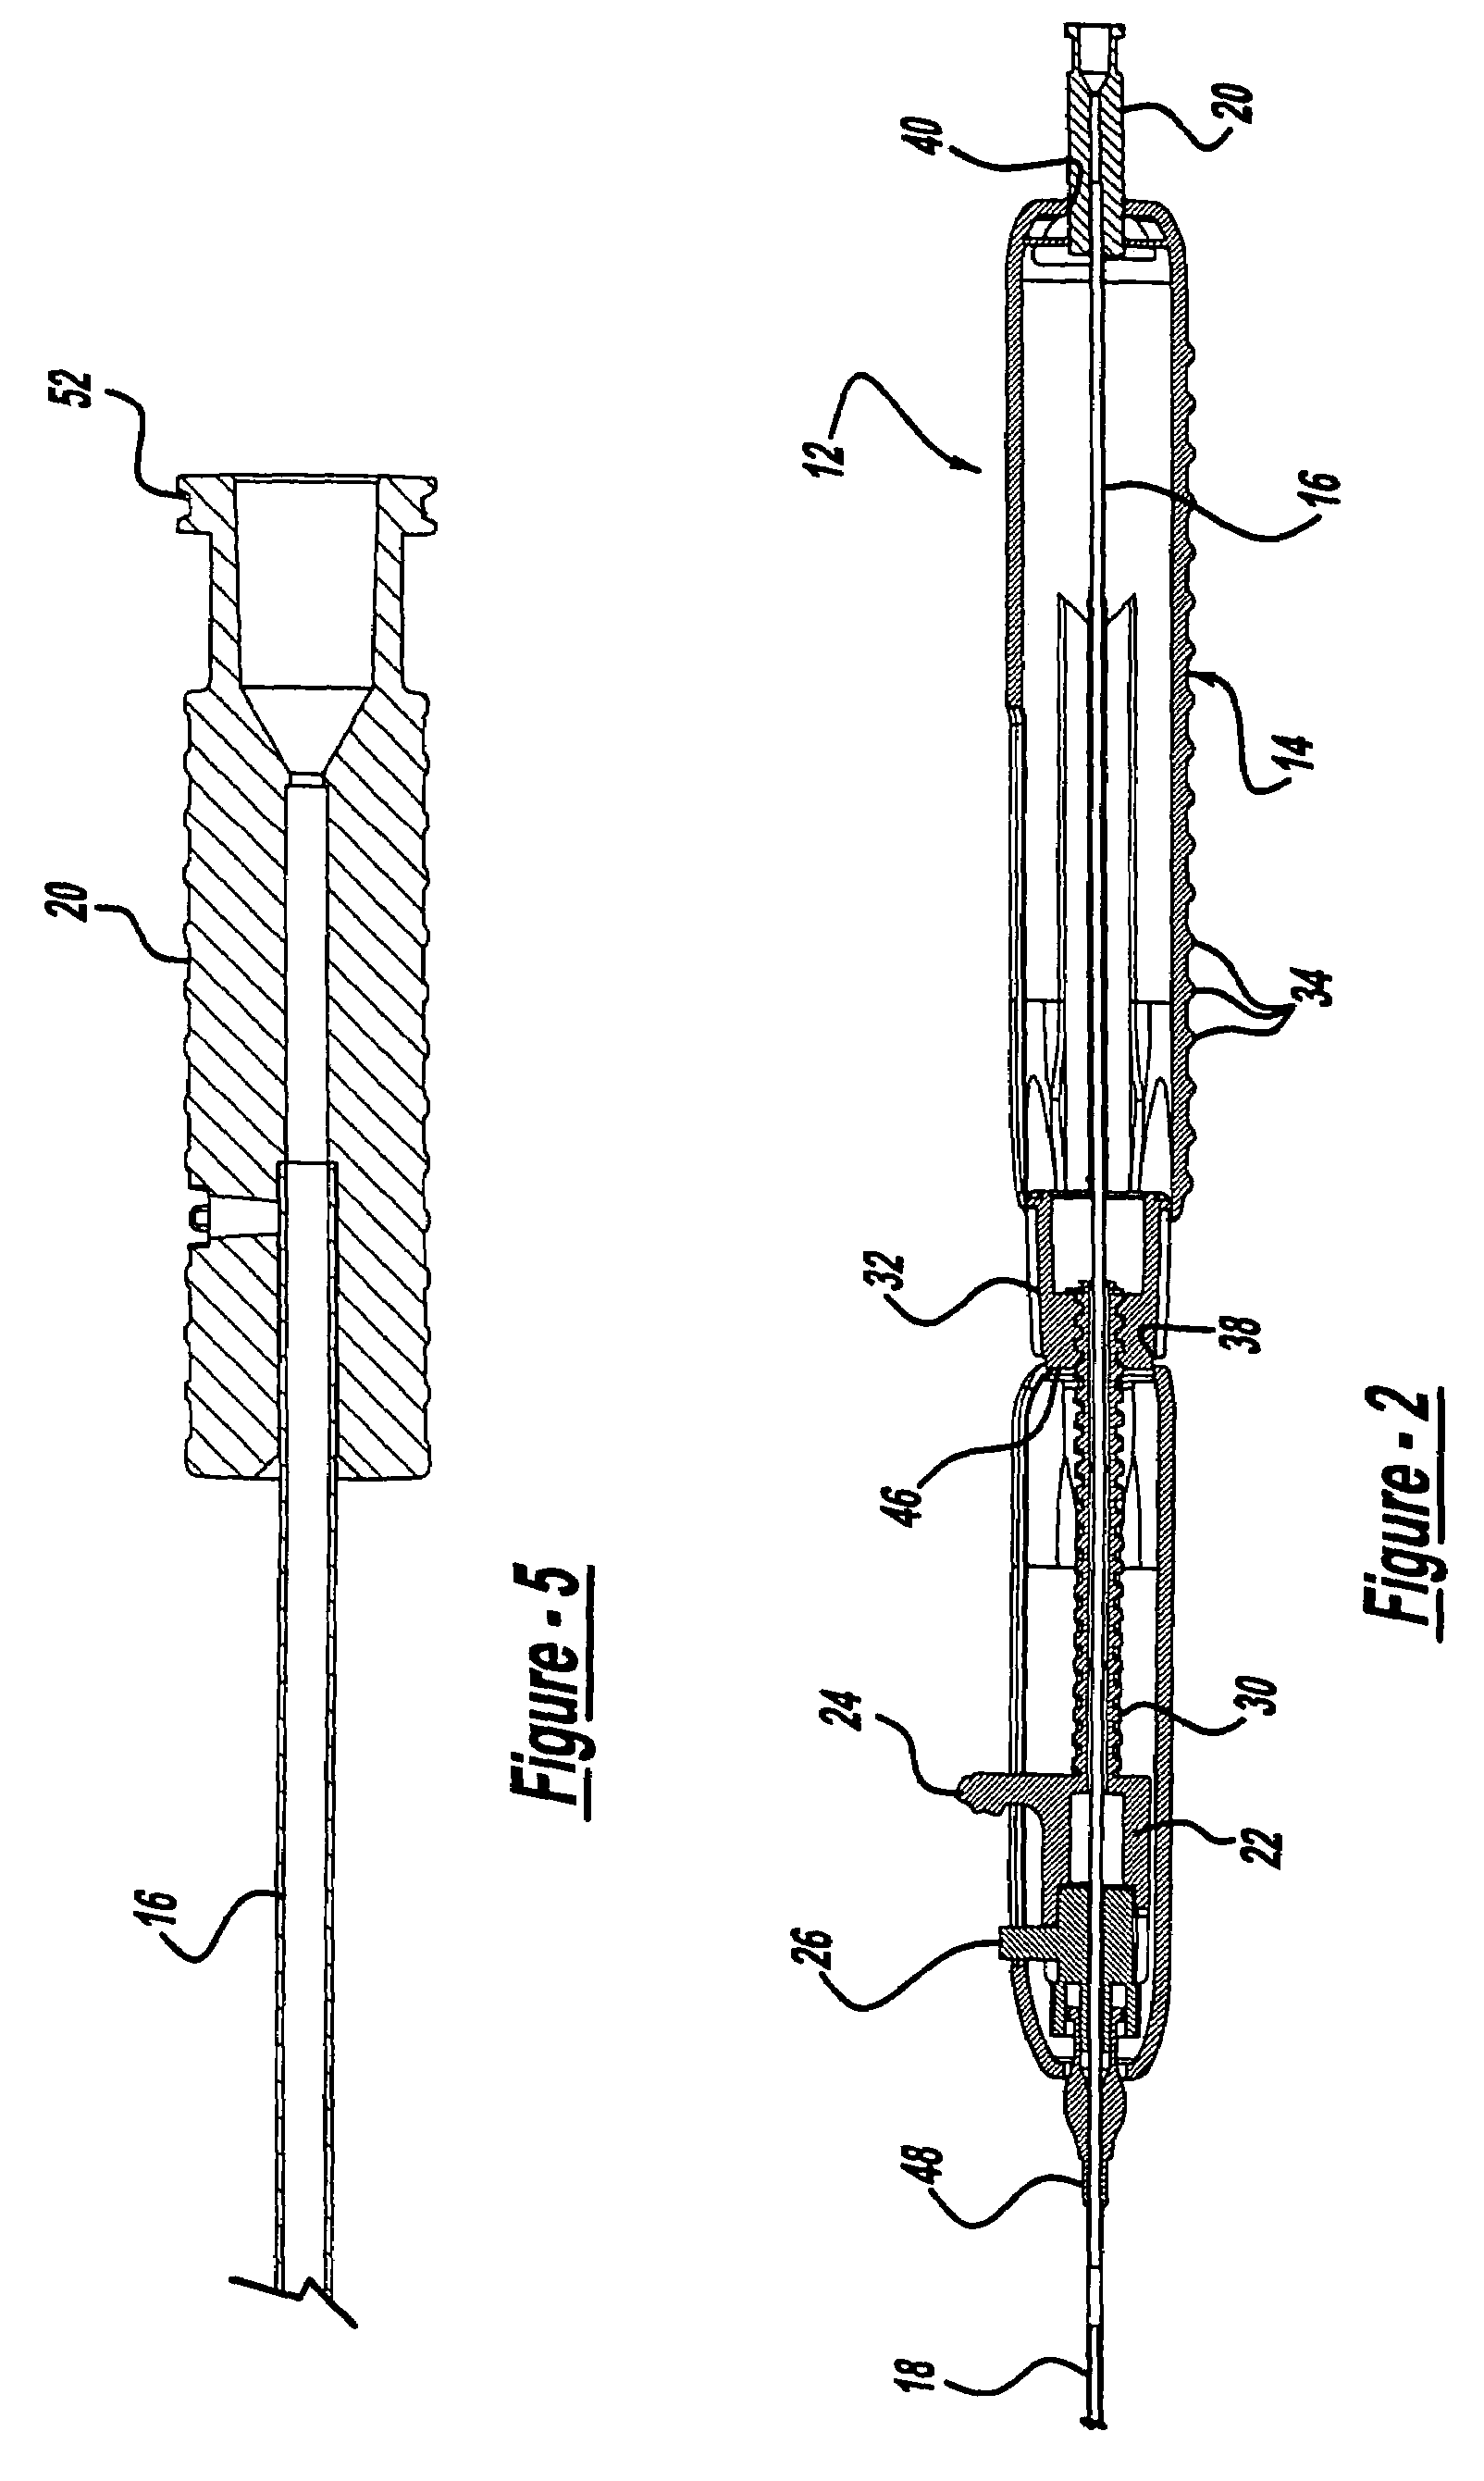 Method for locking handle deployment mechanism with medical device